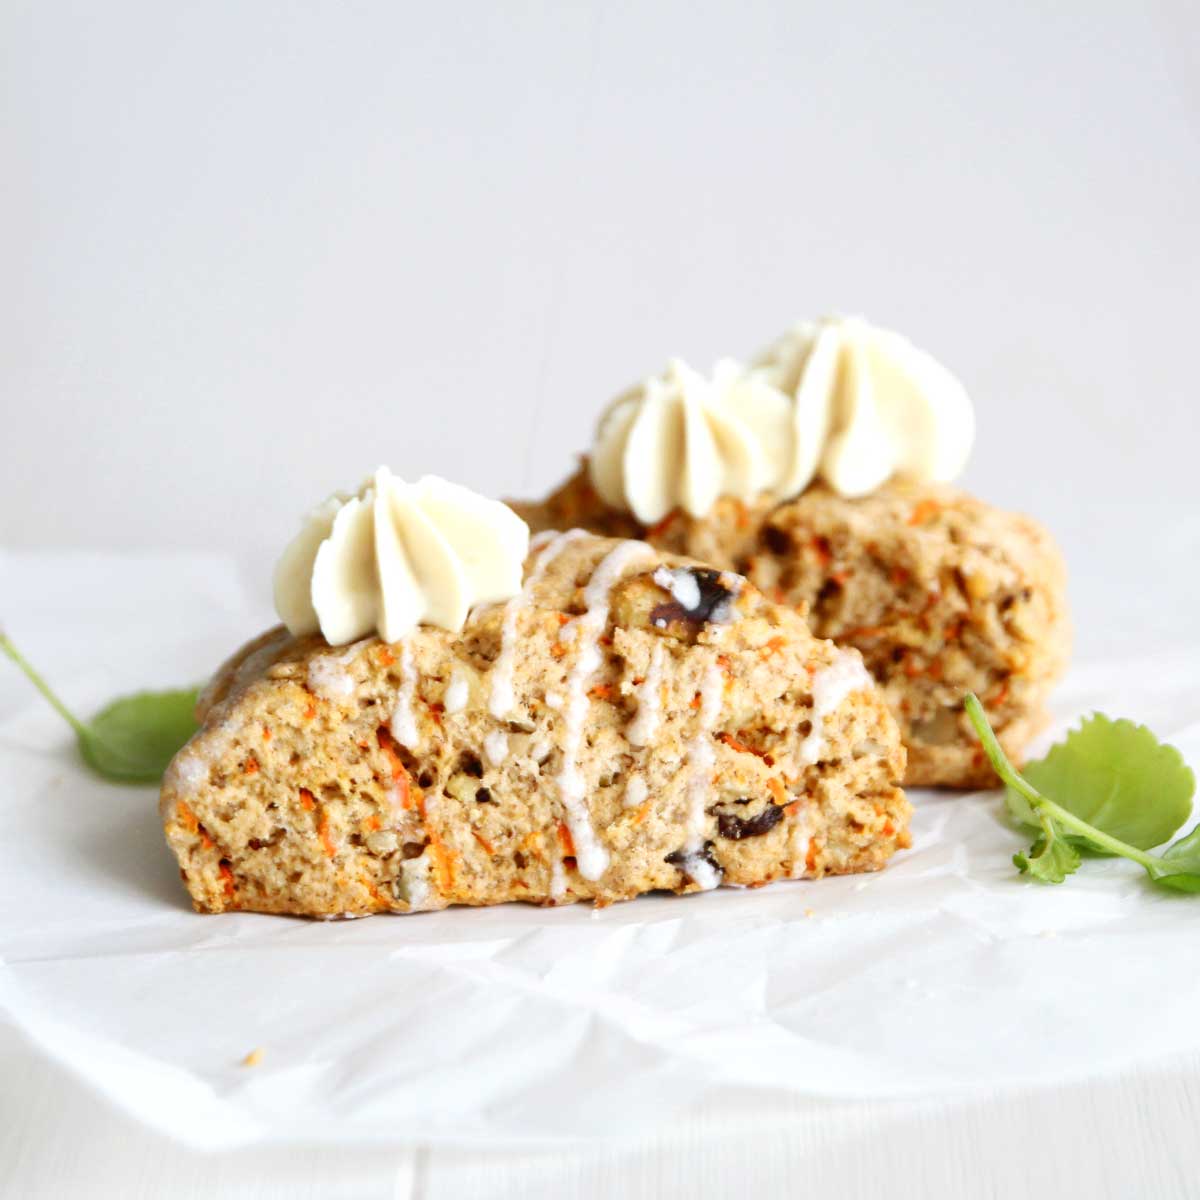 Healthy Vegan Carrot Cake Scones with Coconut Oil - Ricotta Almond Easter Eggs